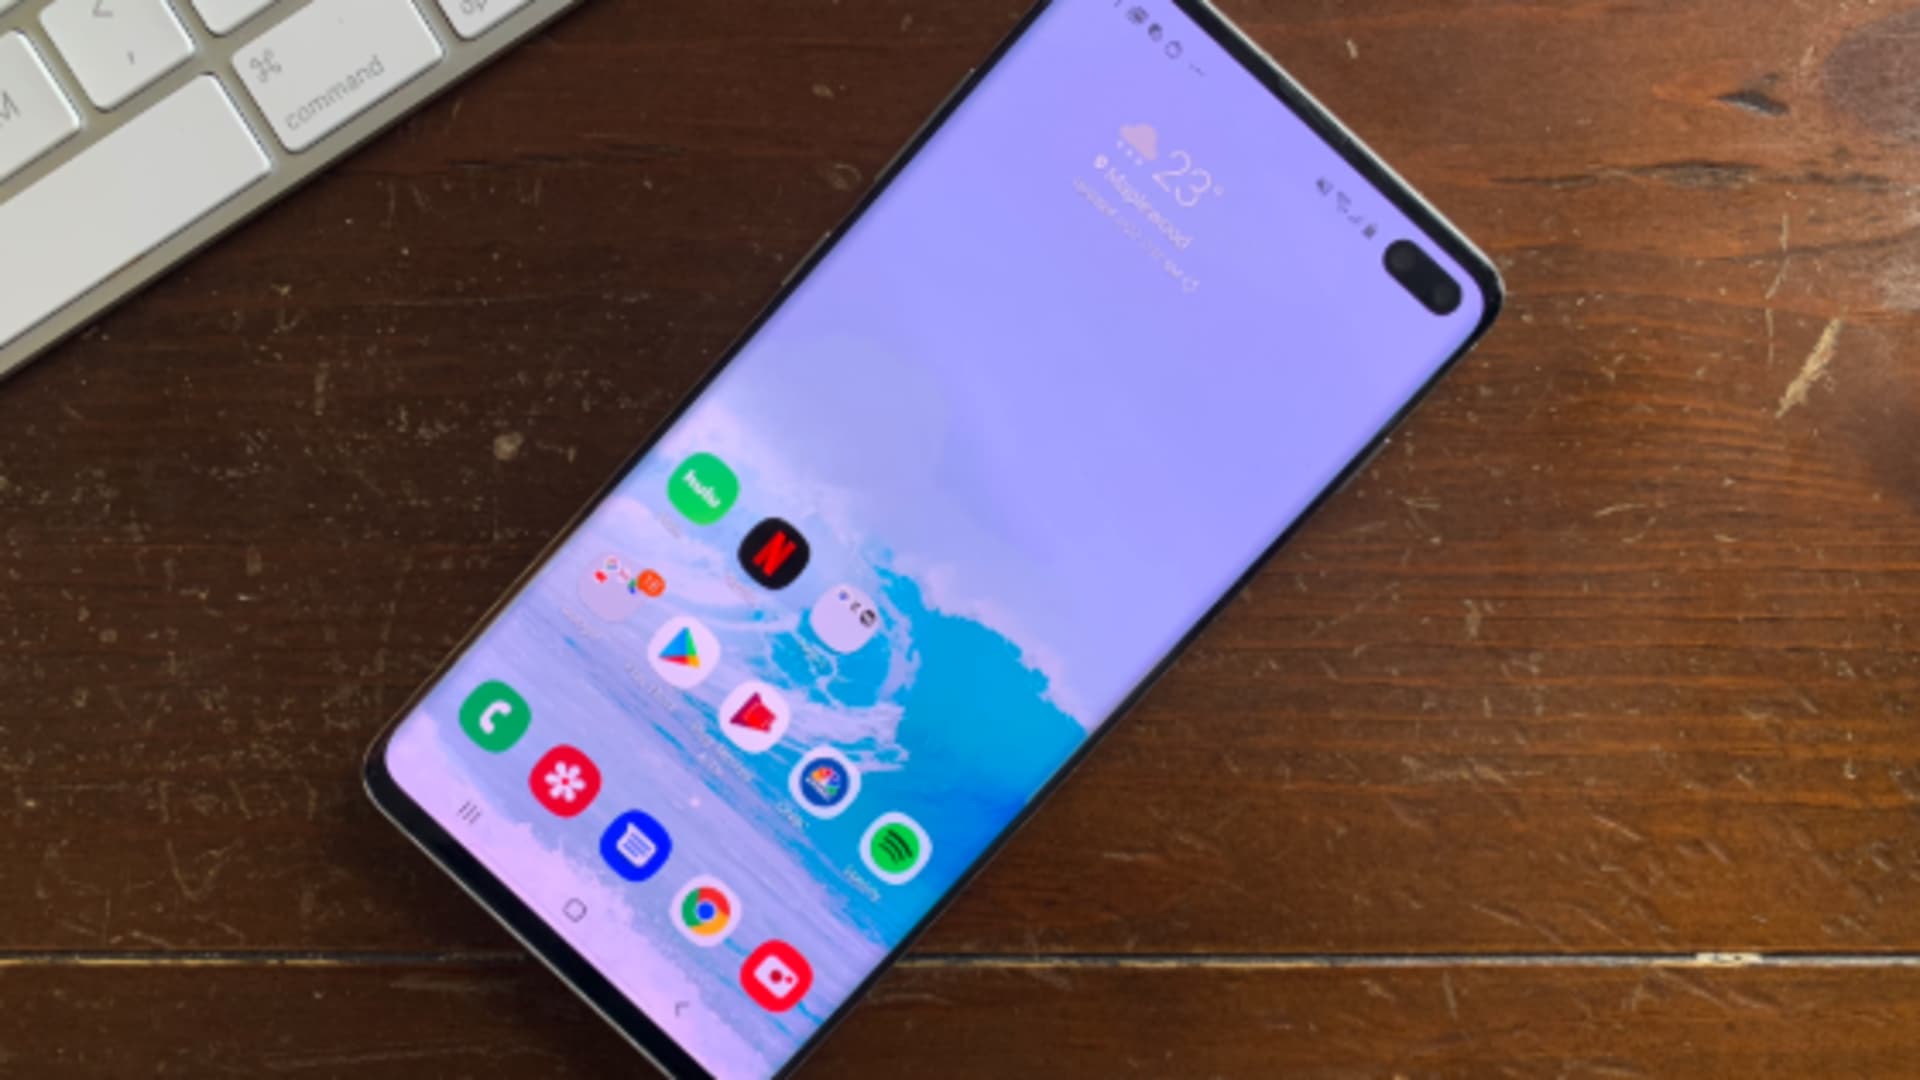 Samsung Galaxy S10 Plus Review: Milestone Before The Next Phase